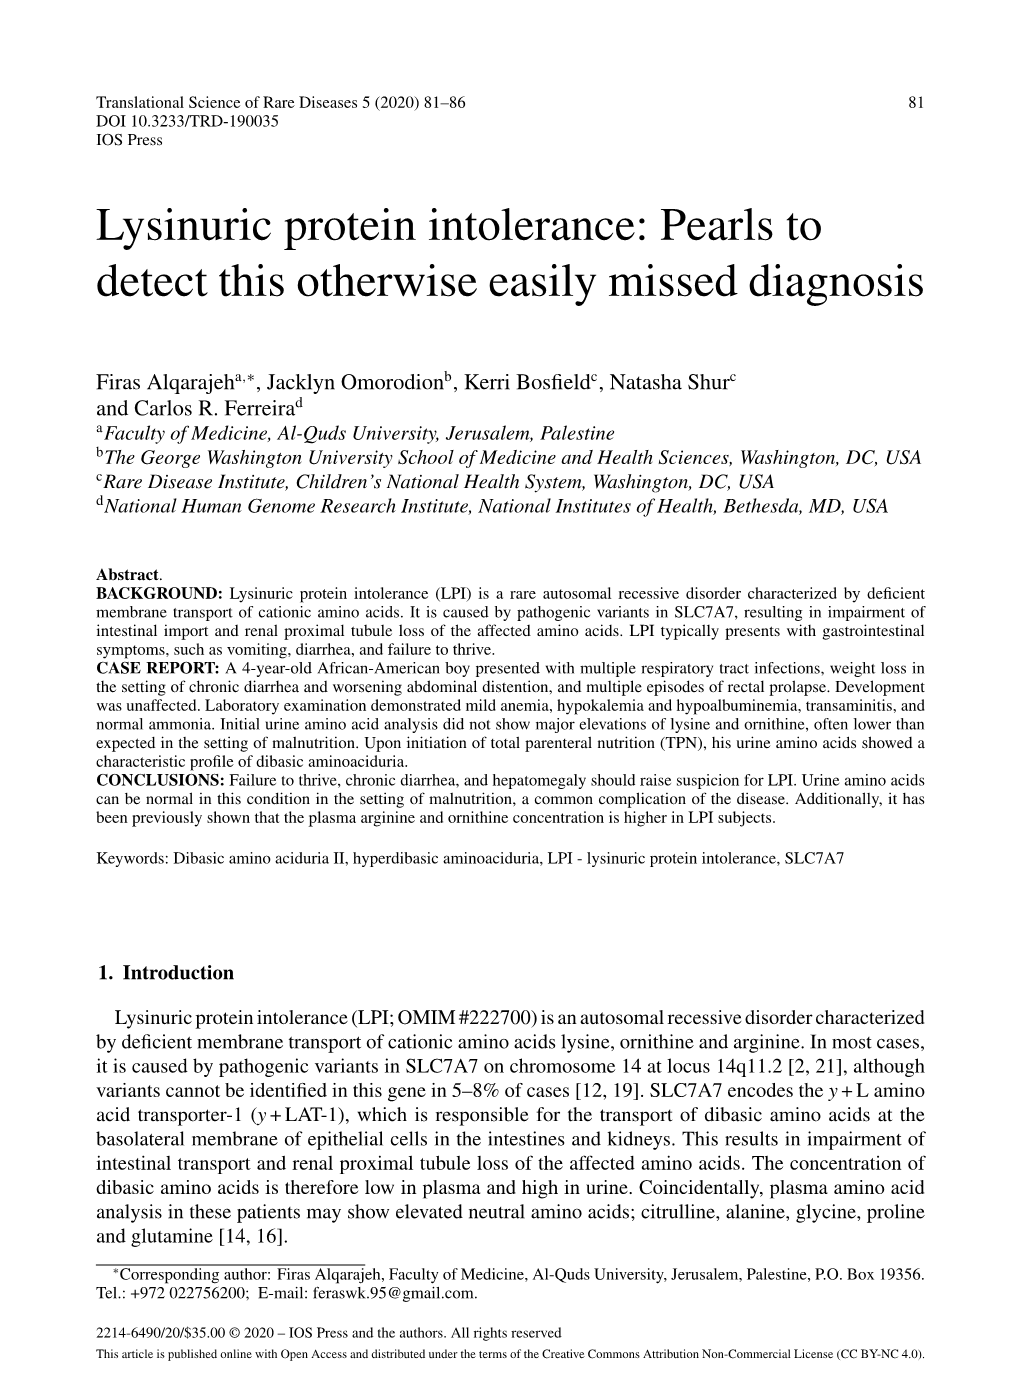 Lysinuric Protein Intolerance: Pearls to Detect This Otherwise Easily Missed Diagnosis